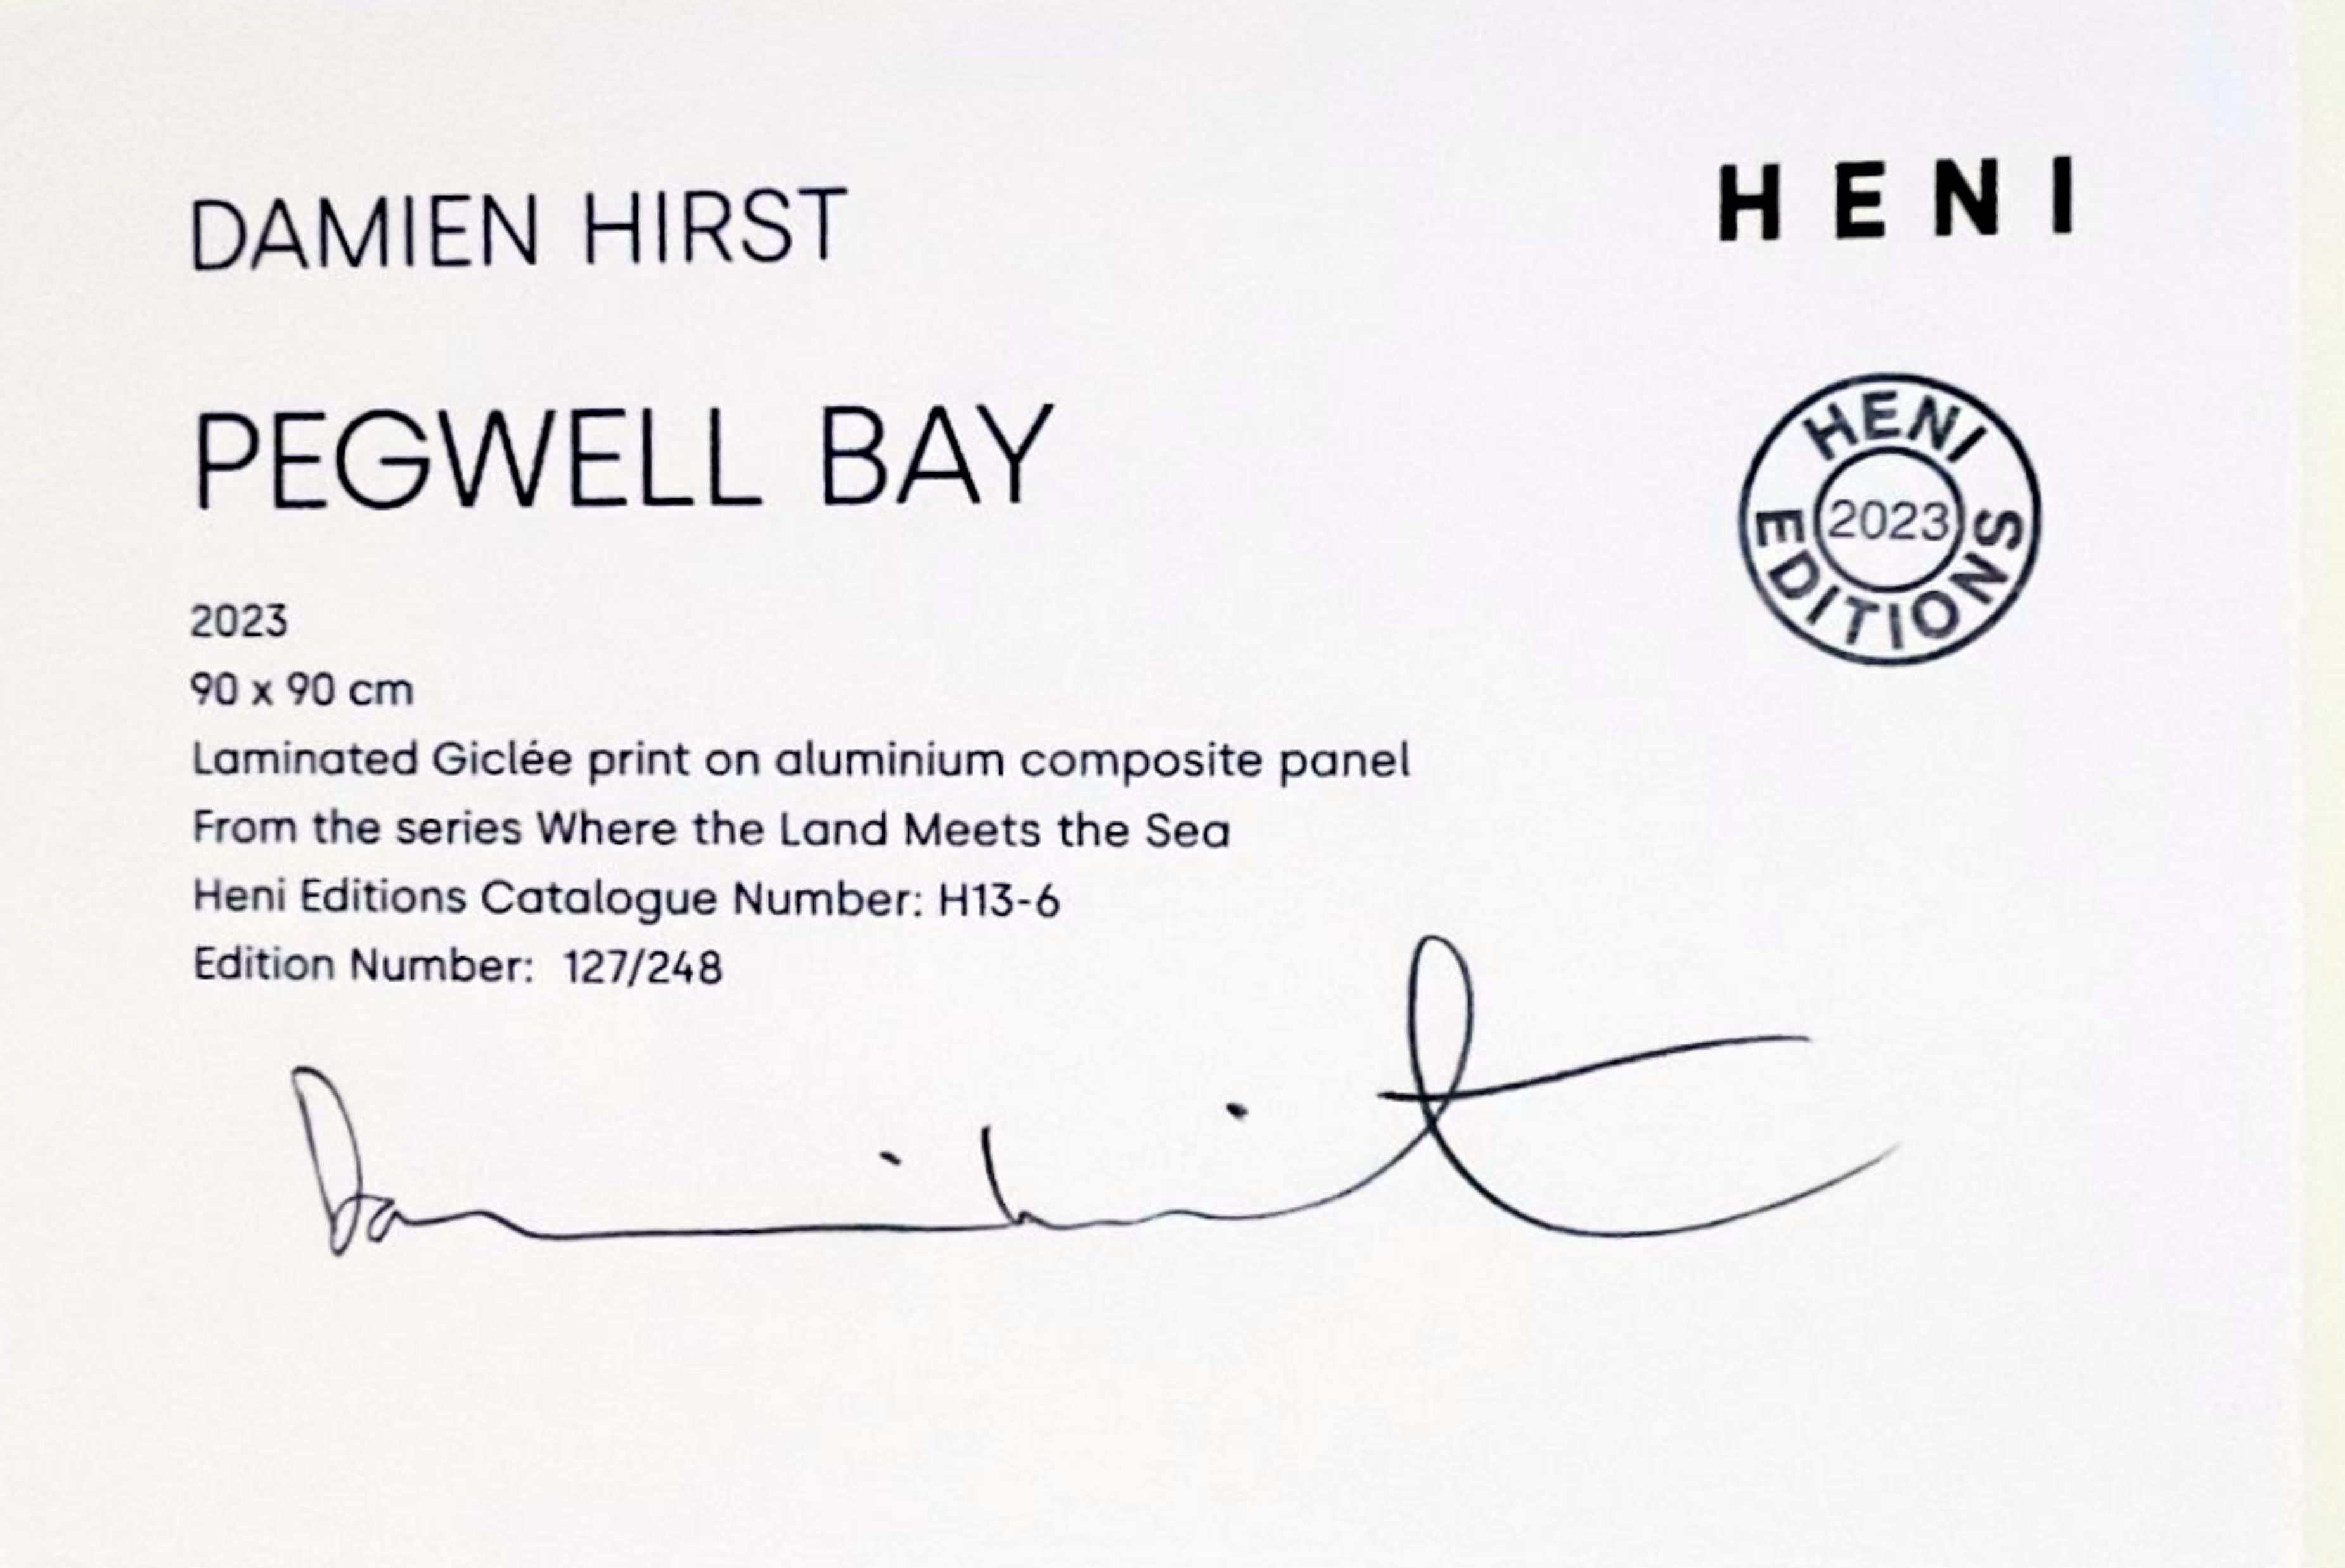 Damien Hirst
Pegwell Bay, H13-6, from Where the Land Meets the Sea, 2023
Laminated Giclée print on aluminium composite panel
35 2/5 × 35 2/5 in  89.9 × 89.9 cm
Hand-signed on the label and numbered 127/248. This artwork can be hung any way